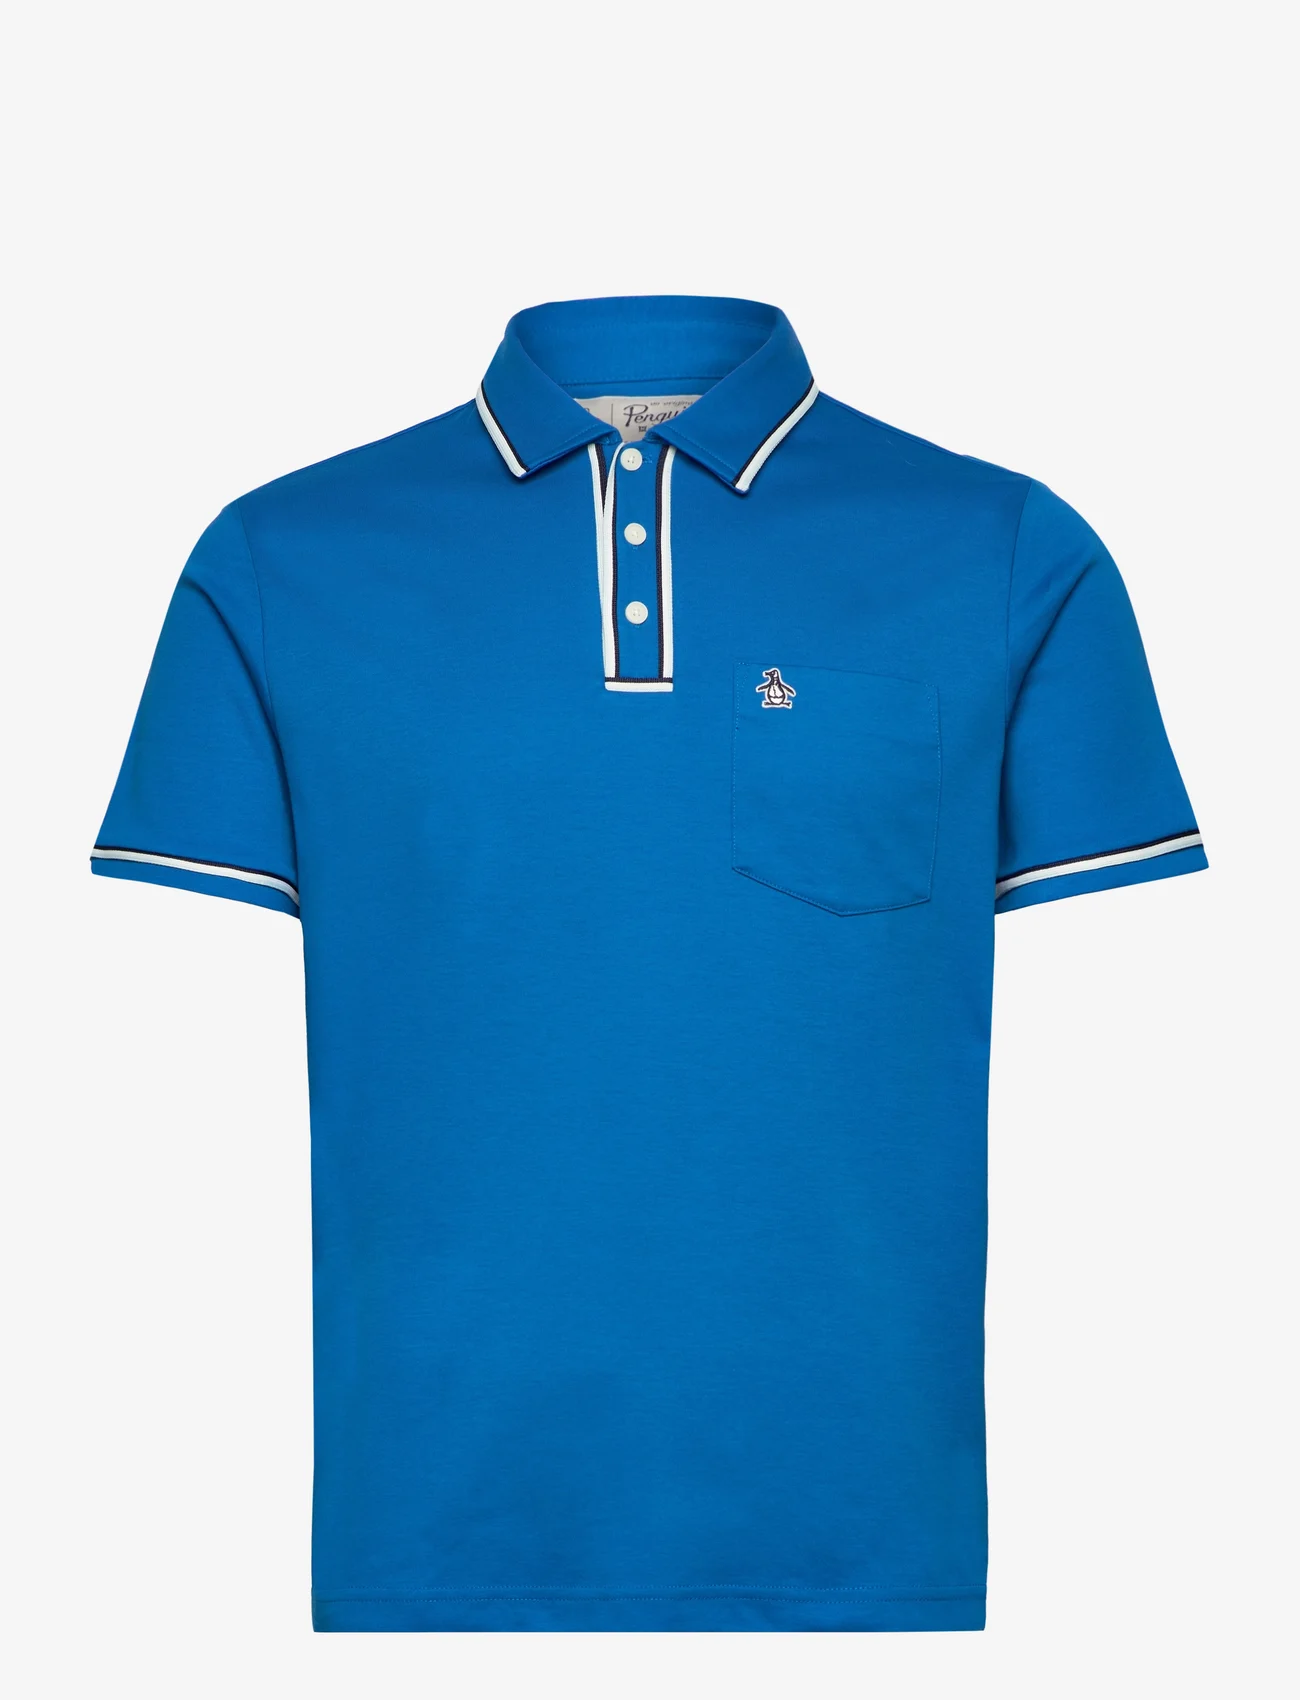 Original Penguin - EARL ORG INT 3D STIC - poloshirts - imperial blue - 0